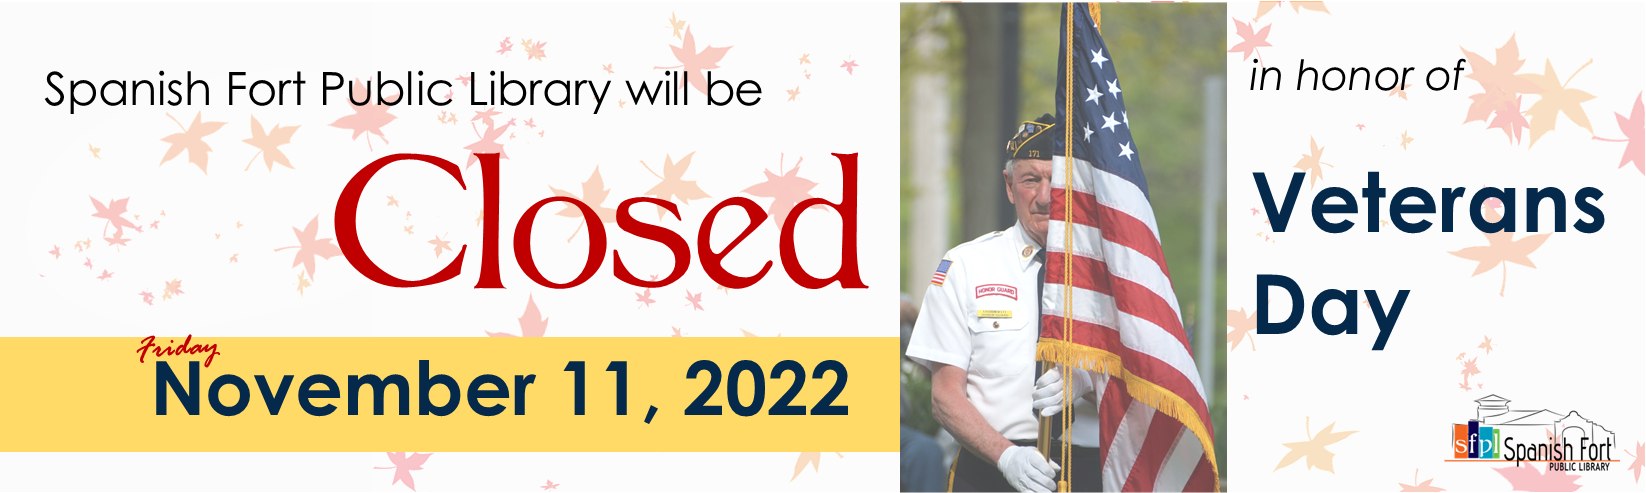 Spanish Fort Public Library will be closed Friday, November 11, 2022 in observance of Veterans Day 2022.